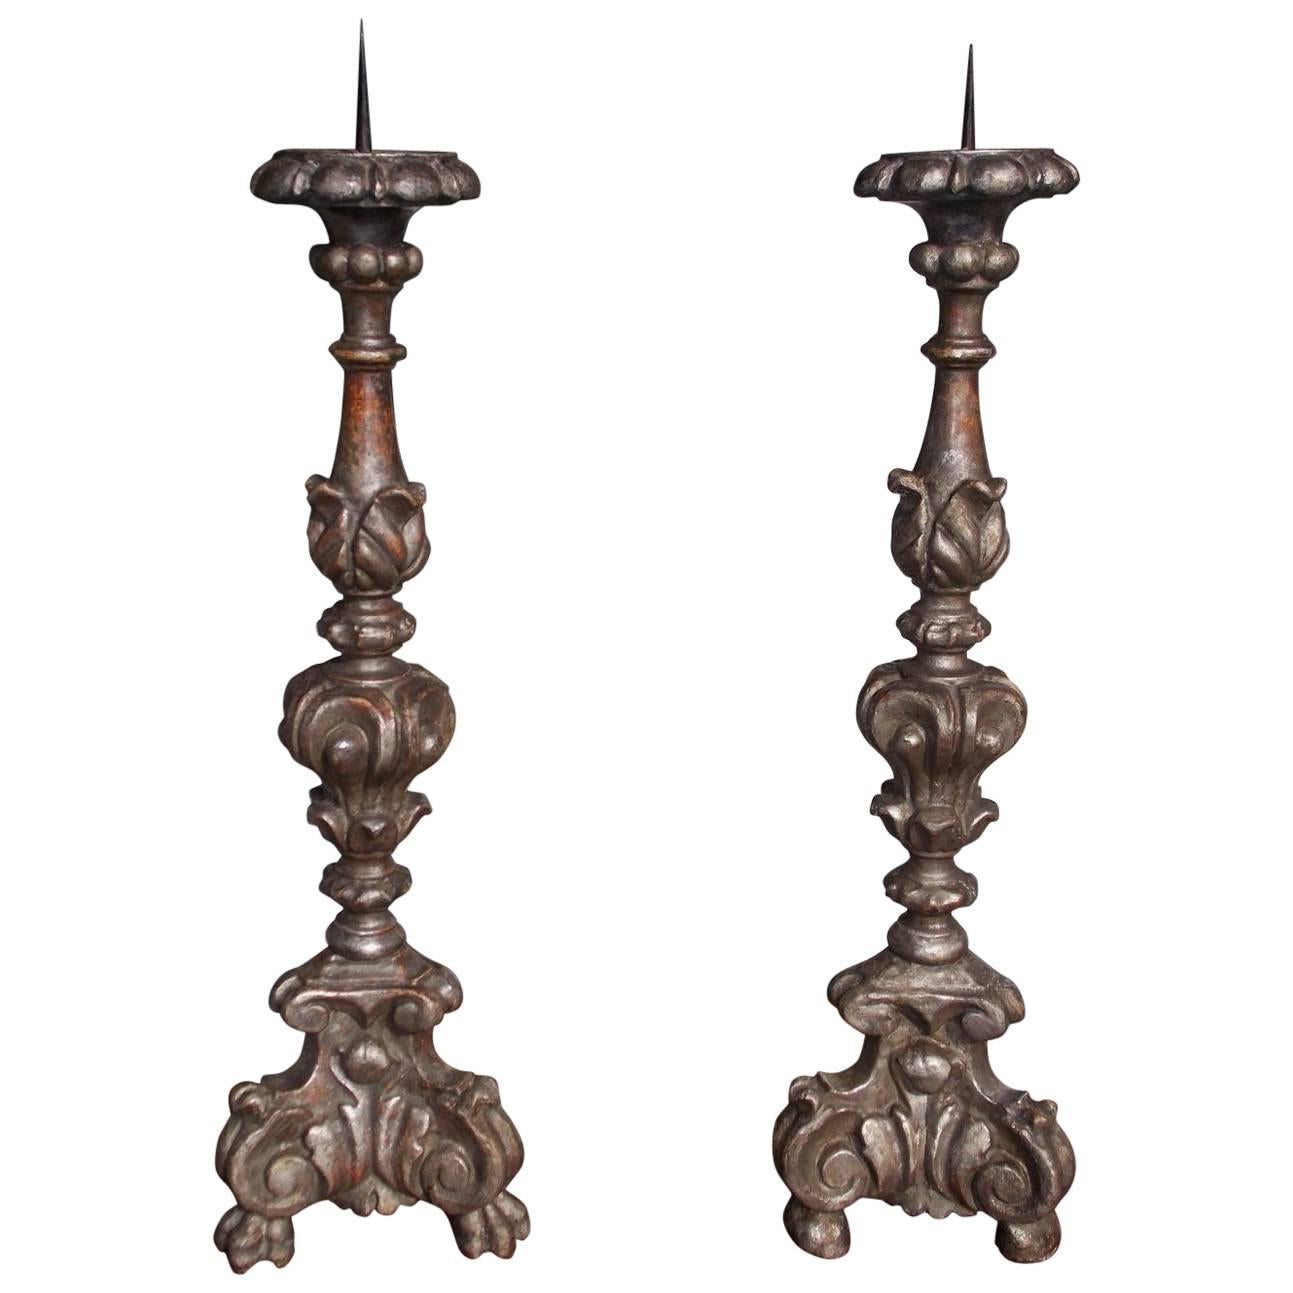 Pair of Italian Carved Wood and Silver Gilt Floral Prickets, Circa 1750